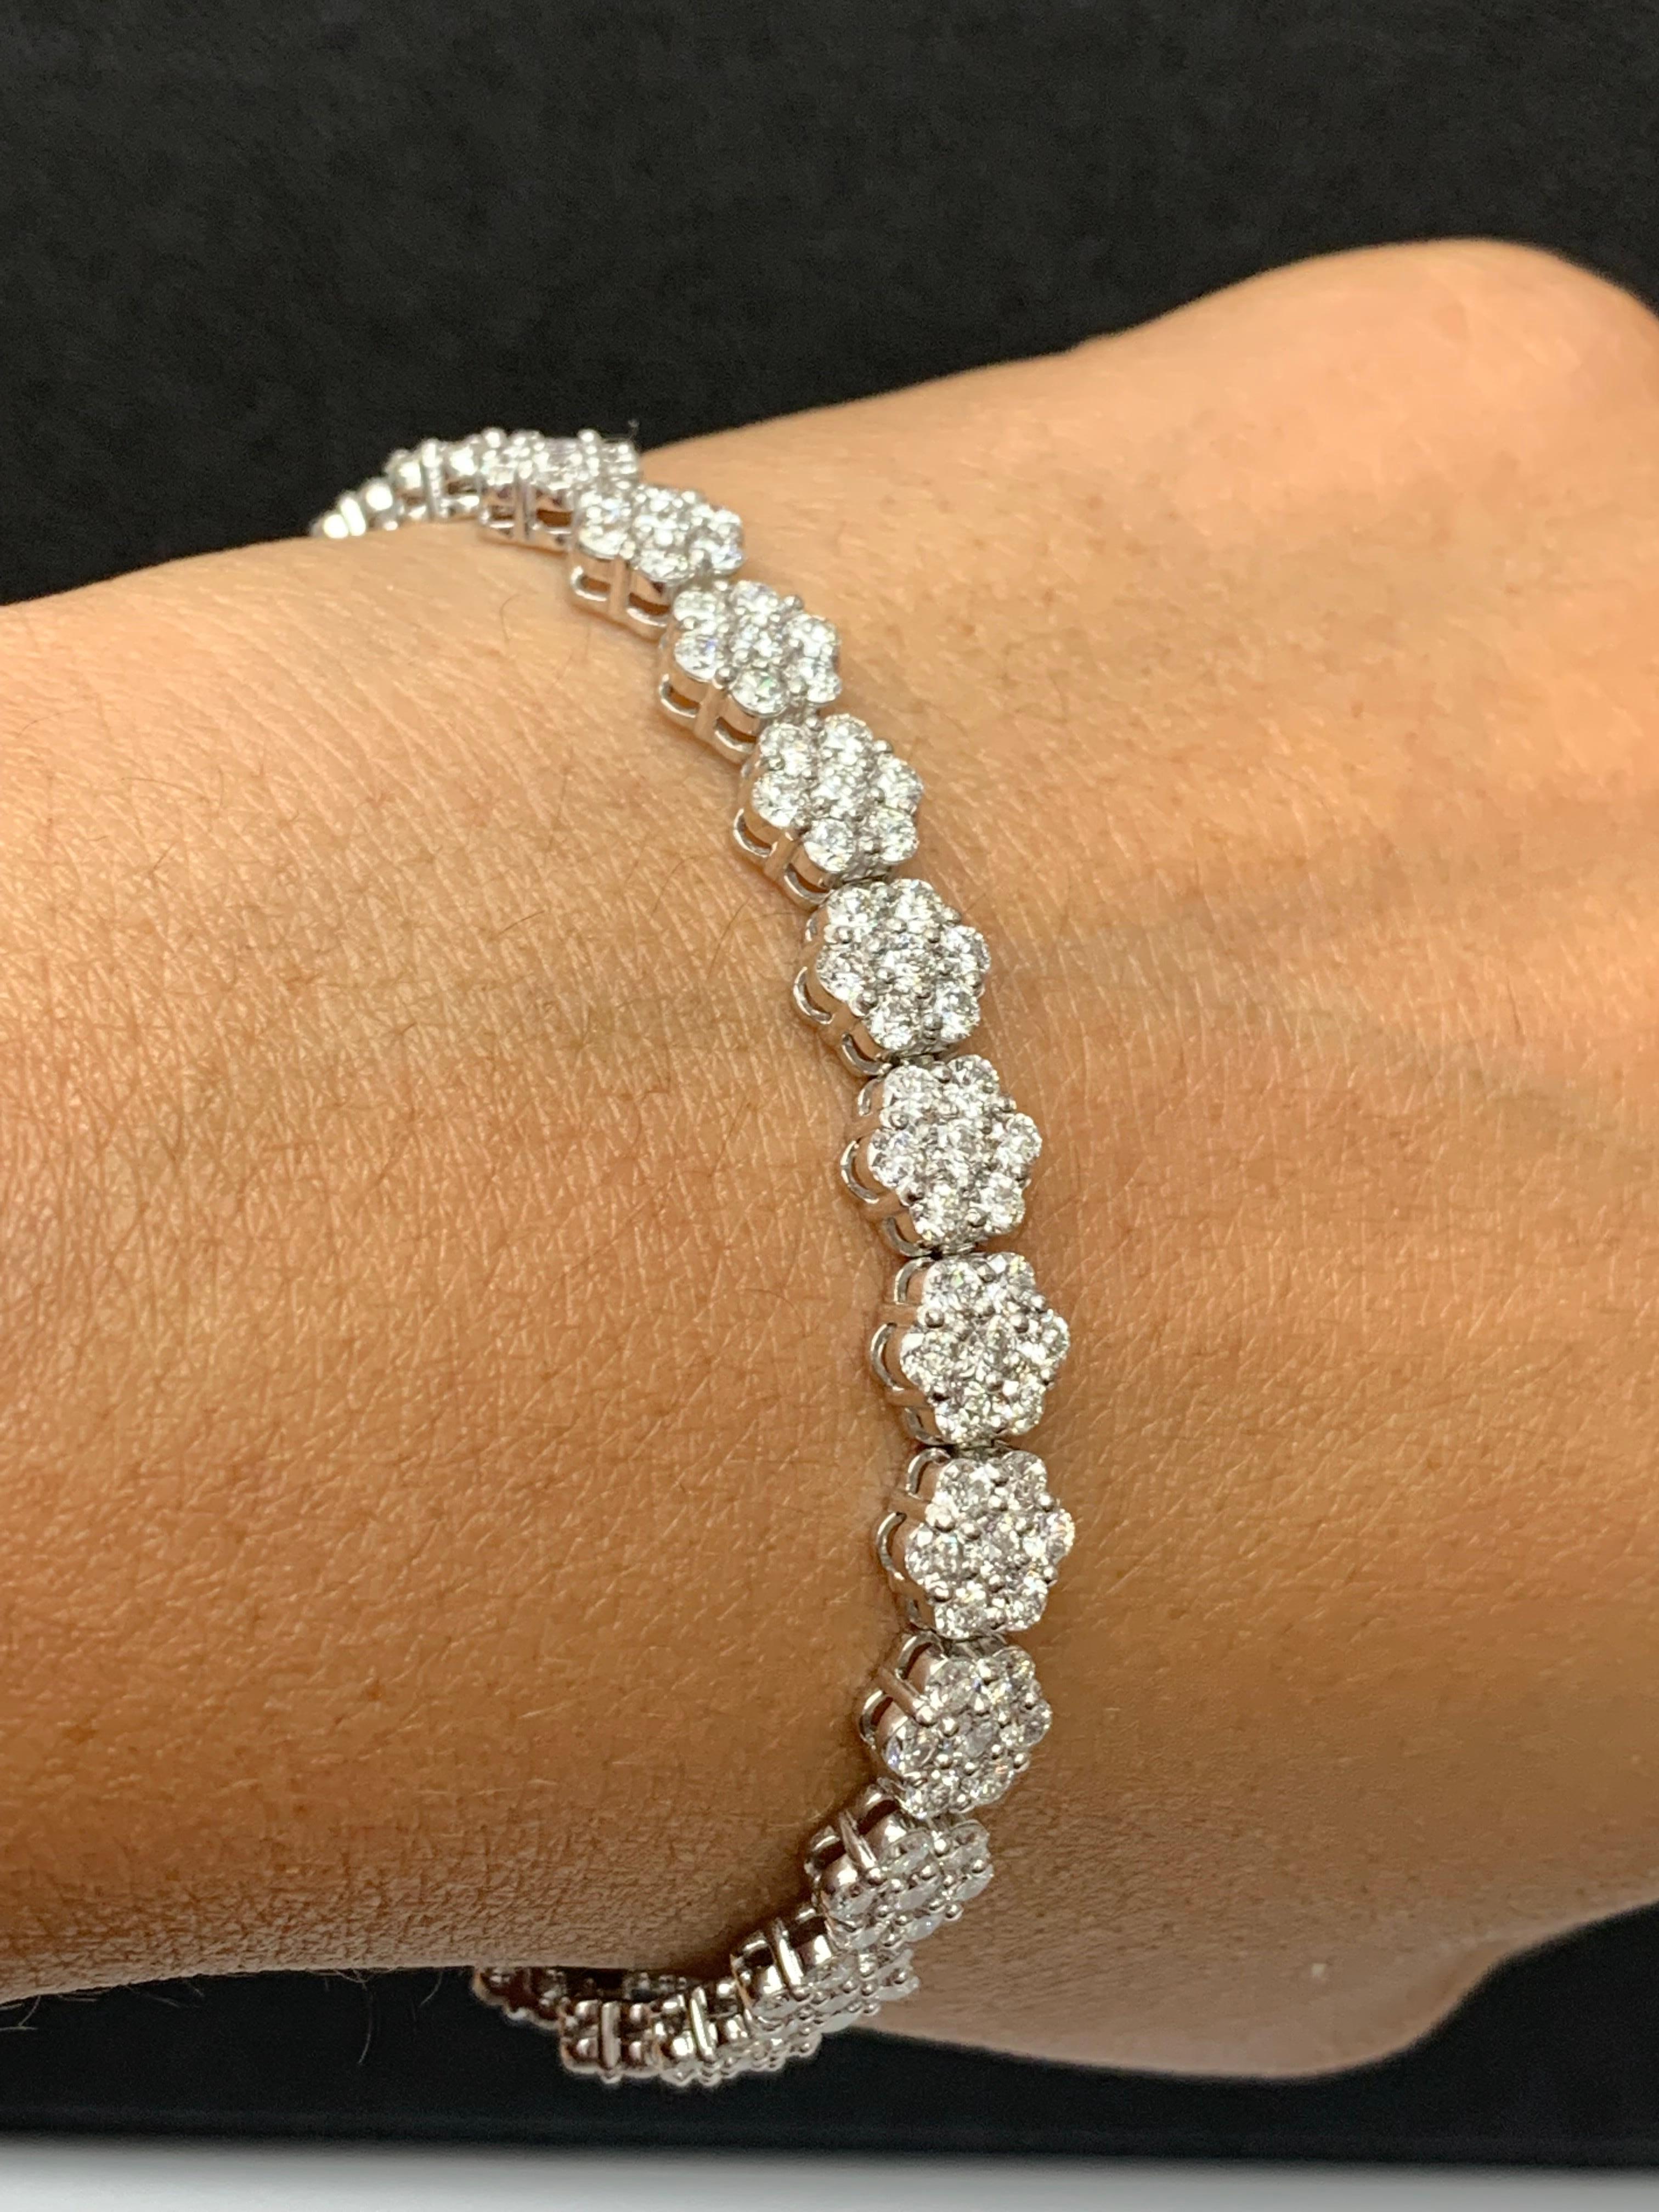 A beautiful diamond flower bracelet showcasing 175 brilliant-cut round diamonds weighing 8.10 carats. double lock mechanism for extra safety.

Style is available in different price ranges. Prices are based on your selection. Don't hesitate to get in